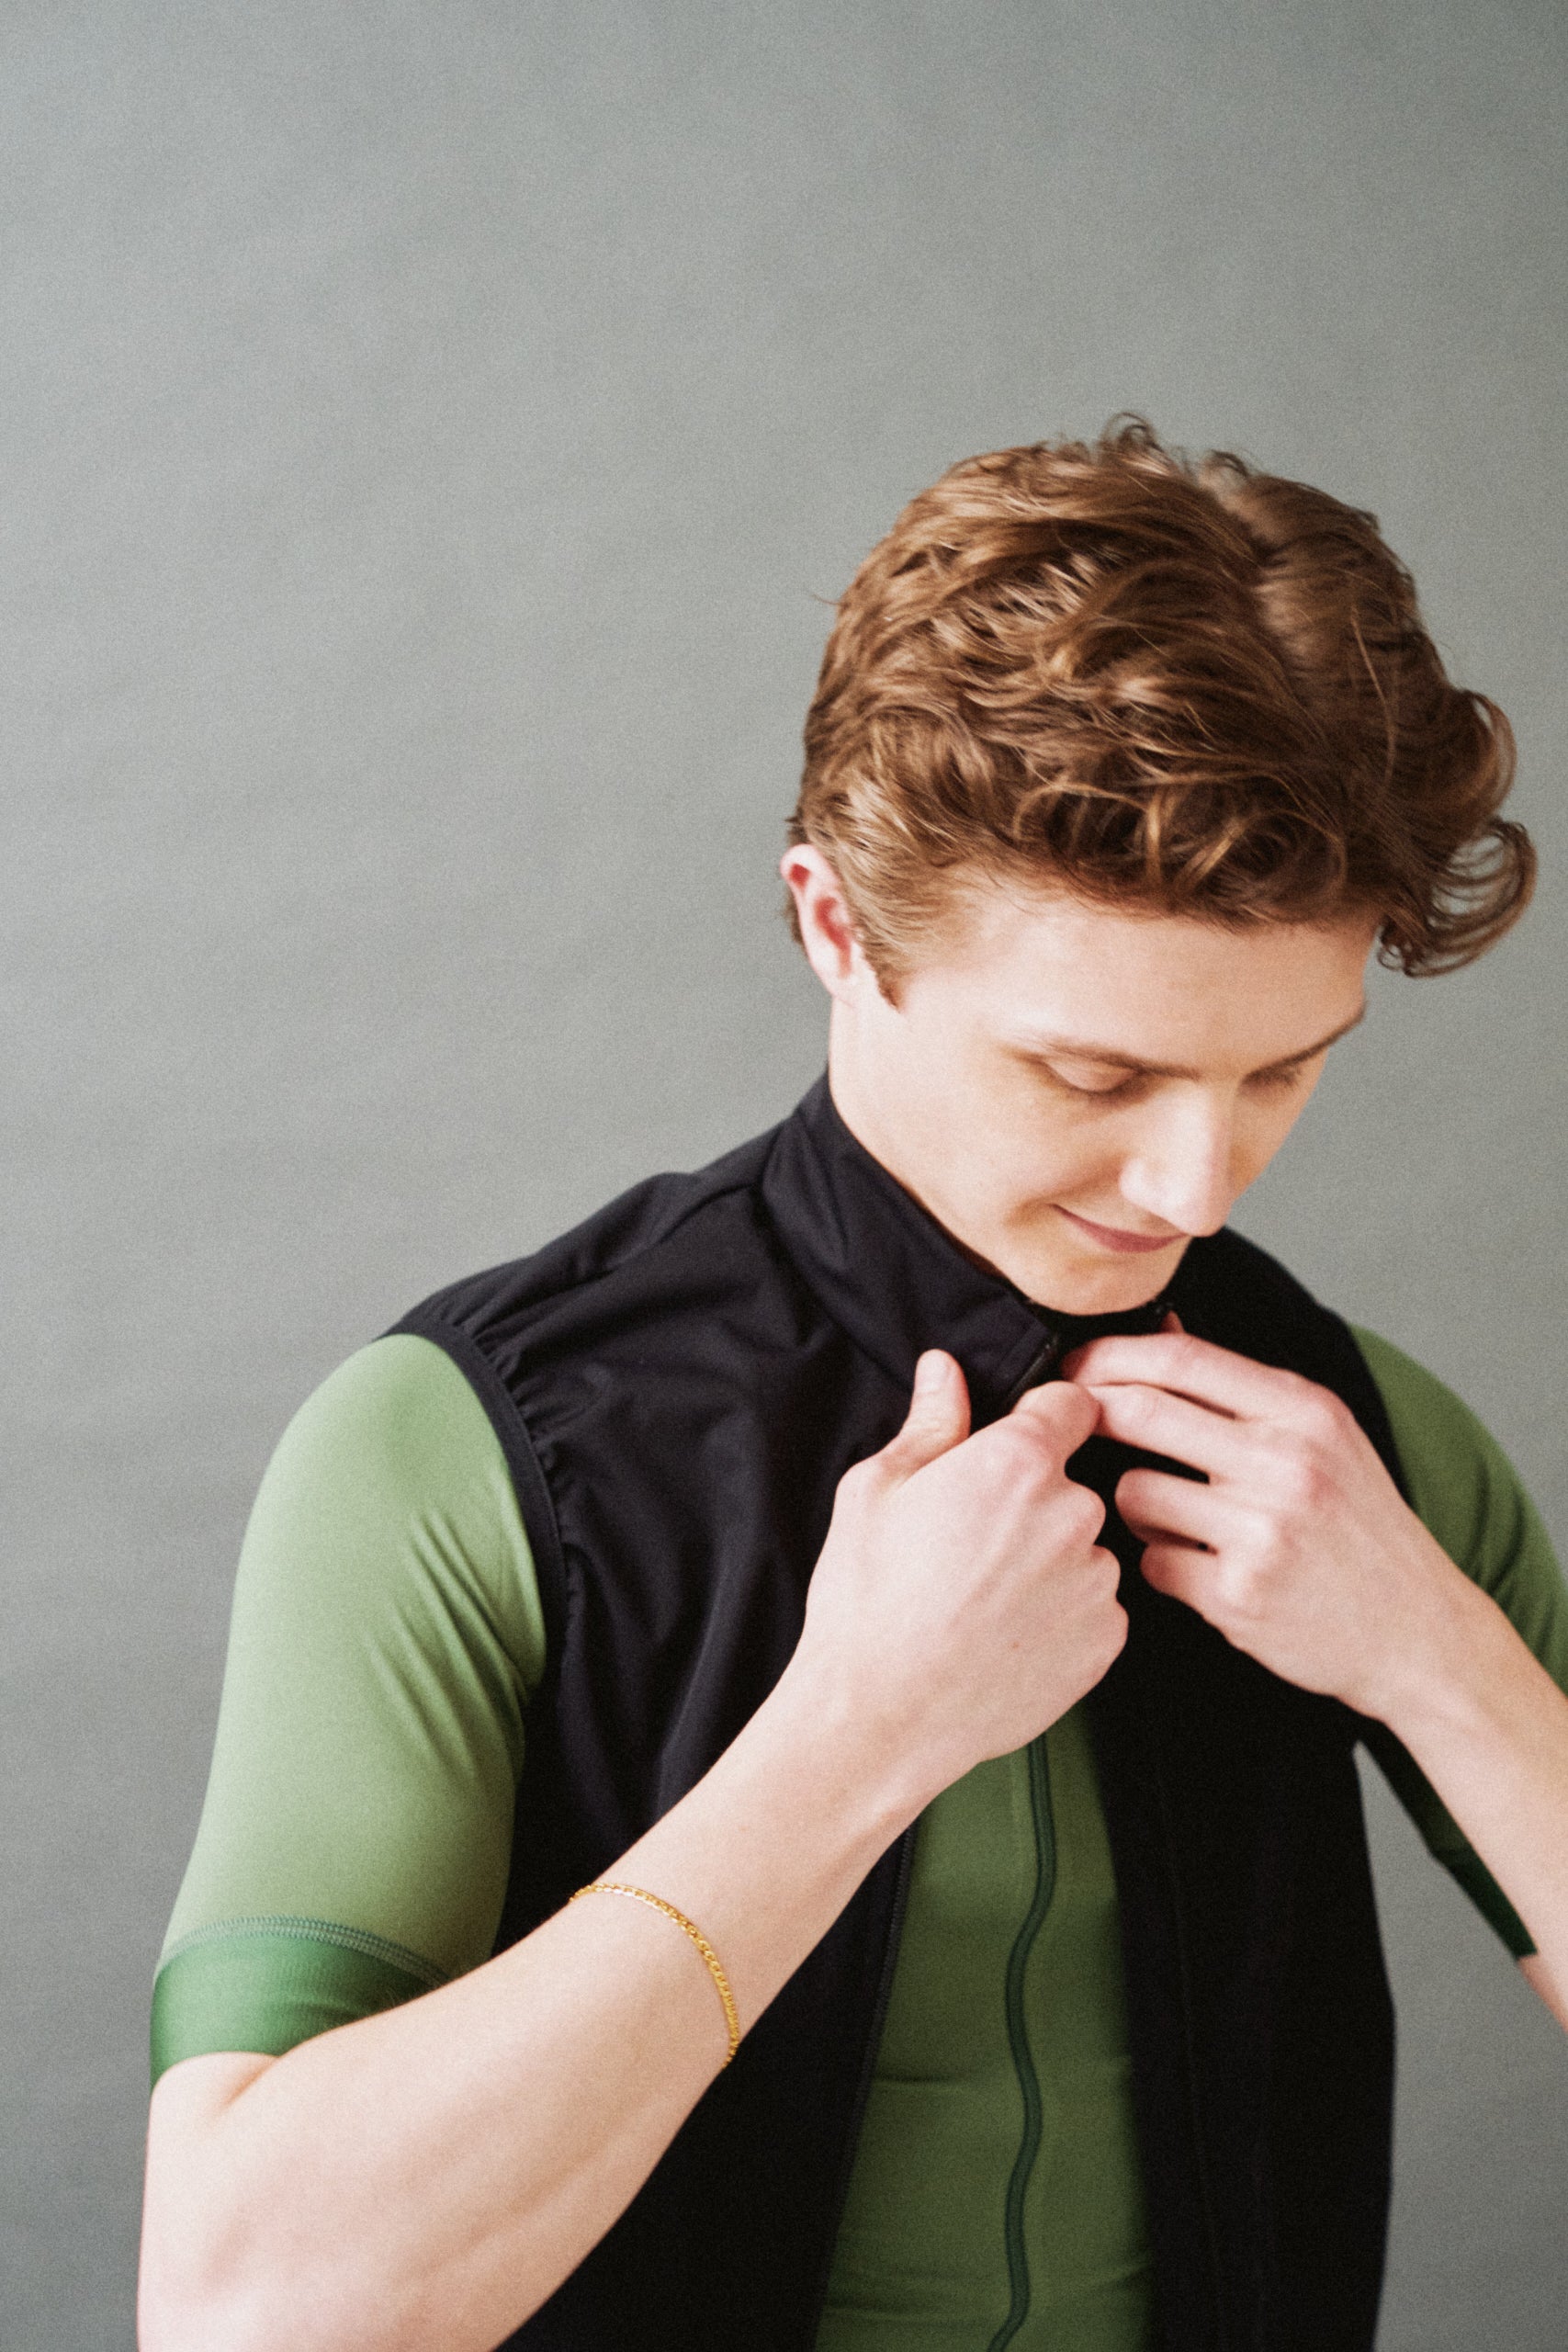 FAR FROM HOME cycling clothing. Green jersey and black wind-block gilet